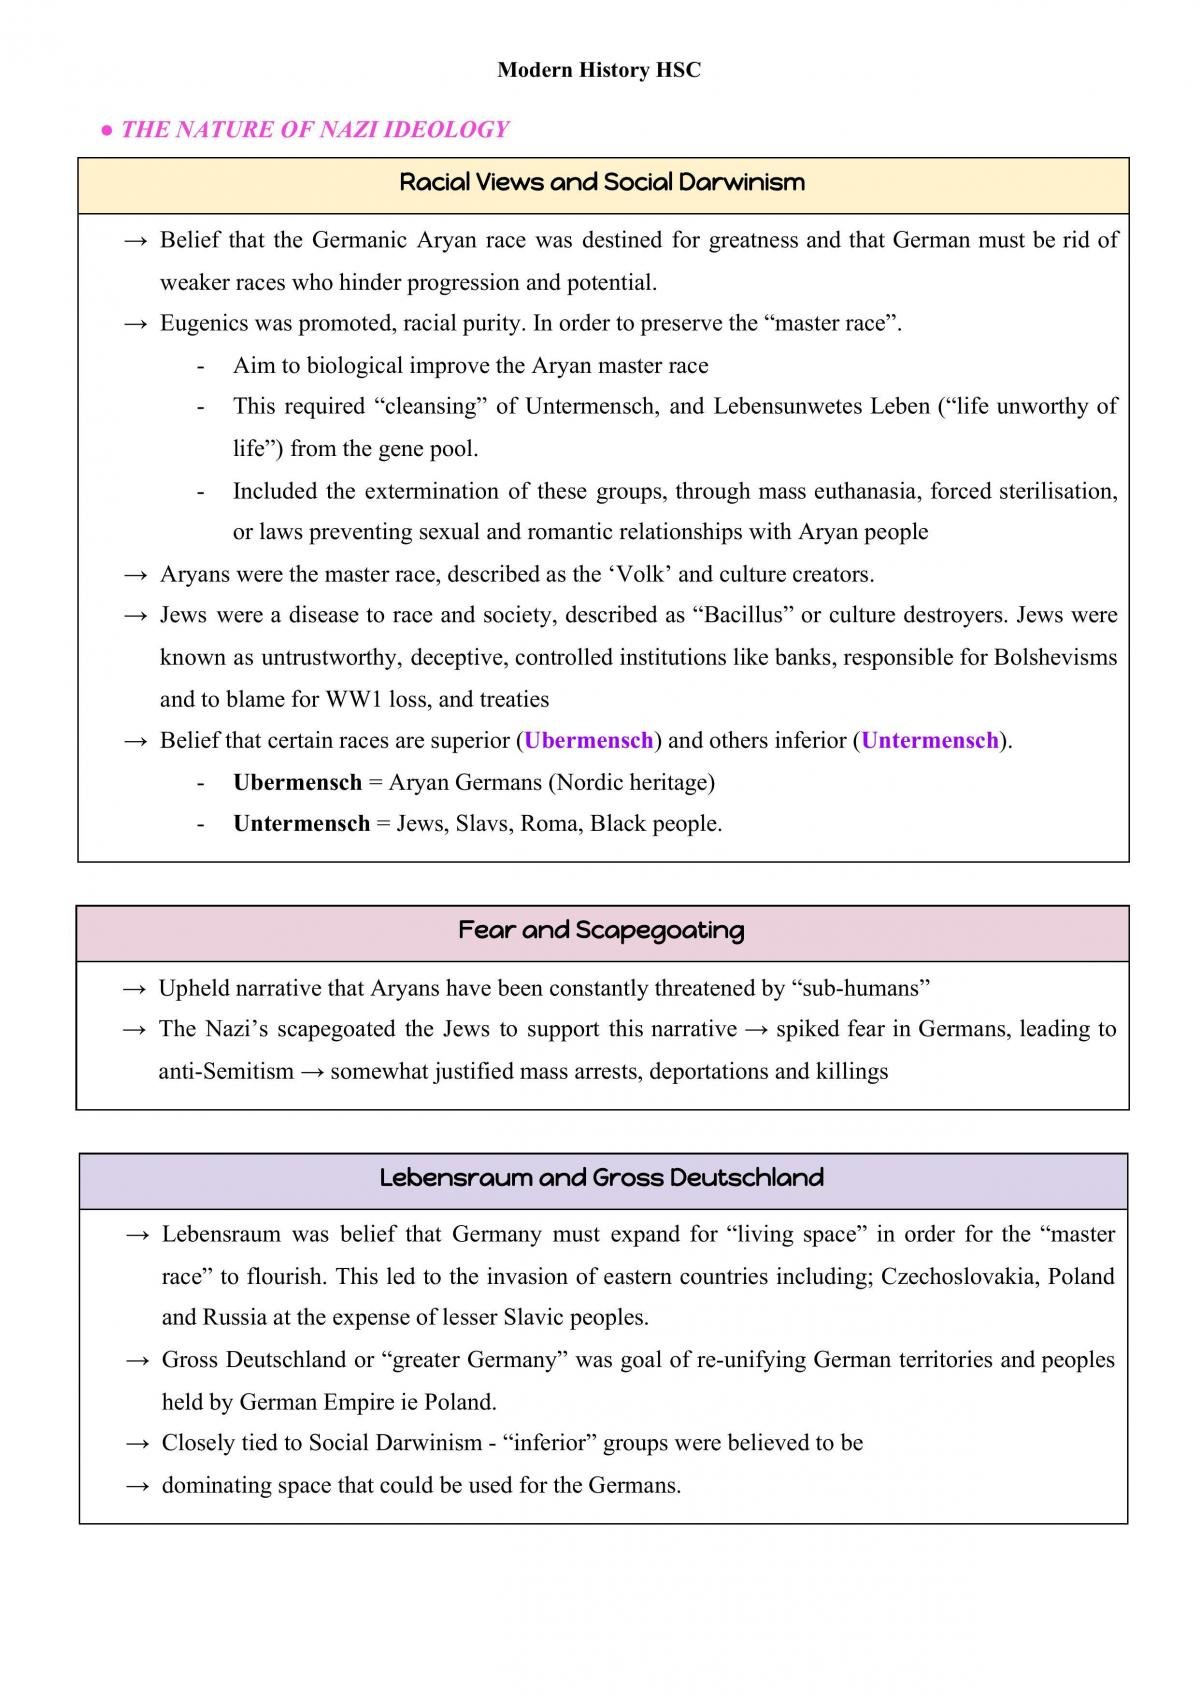 Power and Authority Complete HSC Notes - Page 16